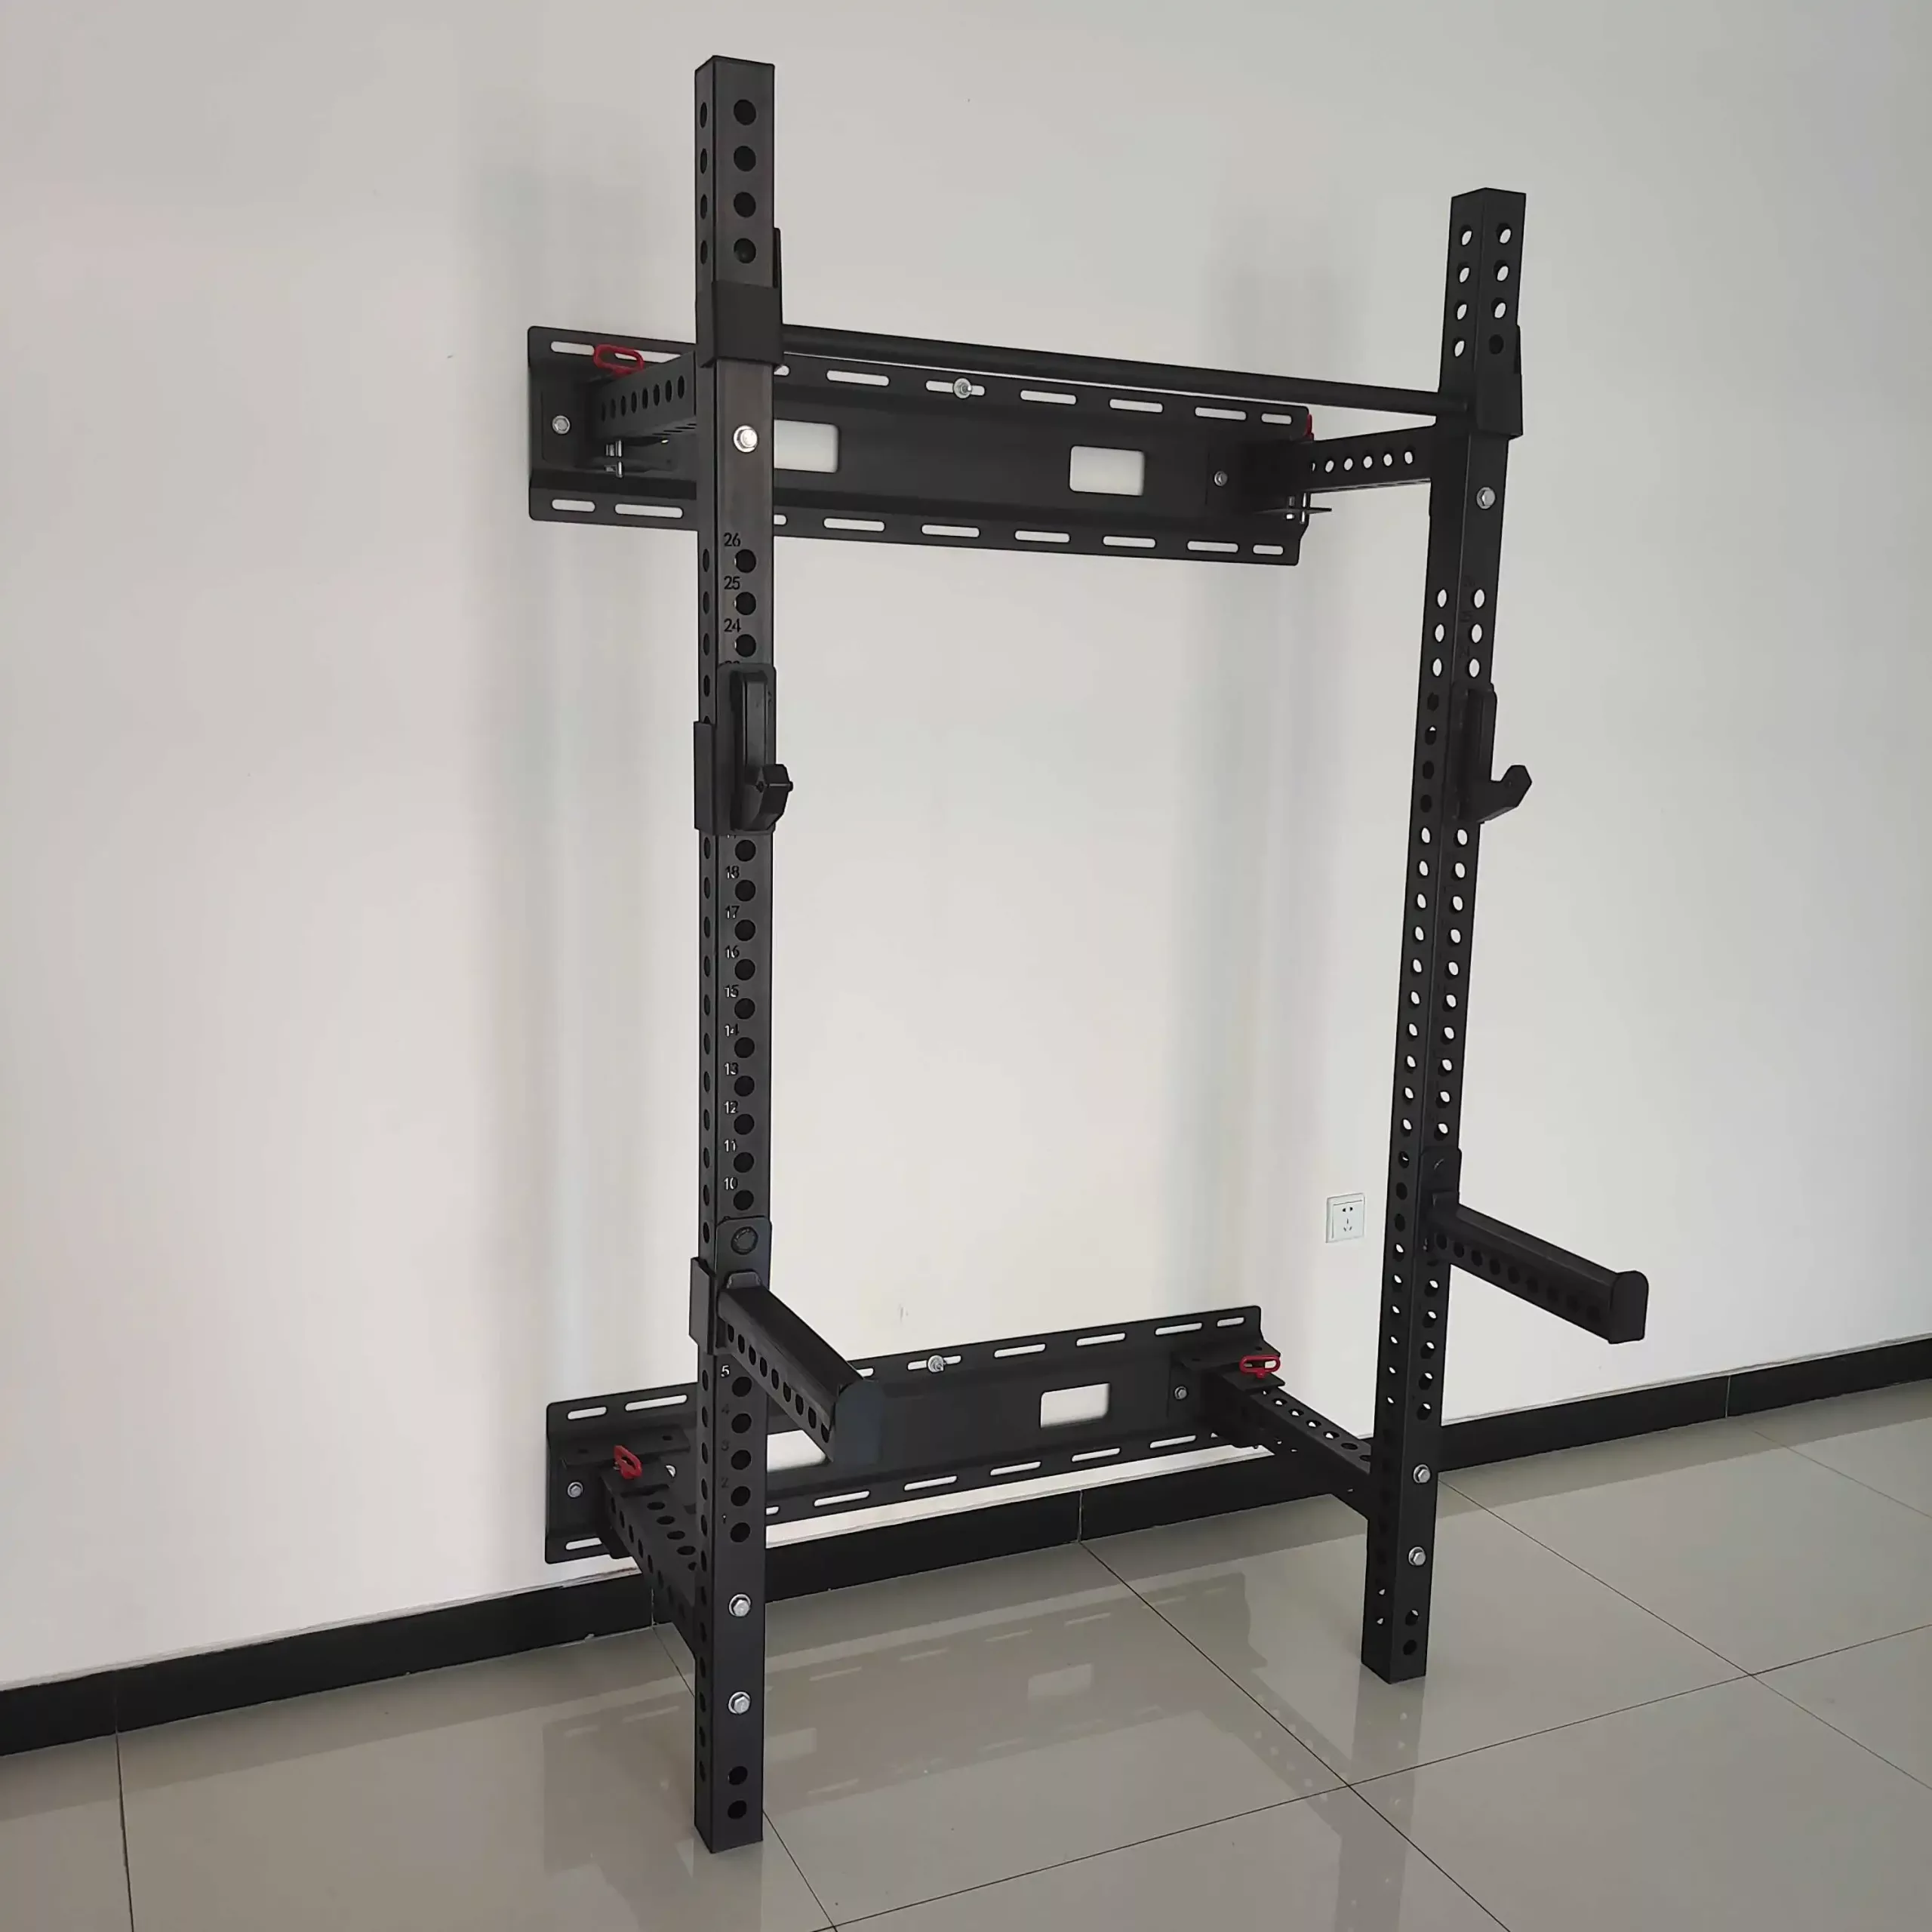 Adjustable Wall Mounted Foldable Half Folding Cage Squat Rack Exercise Workouts Gym Equipment Factory